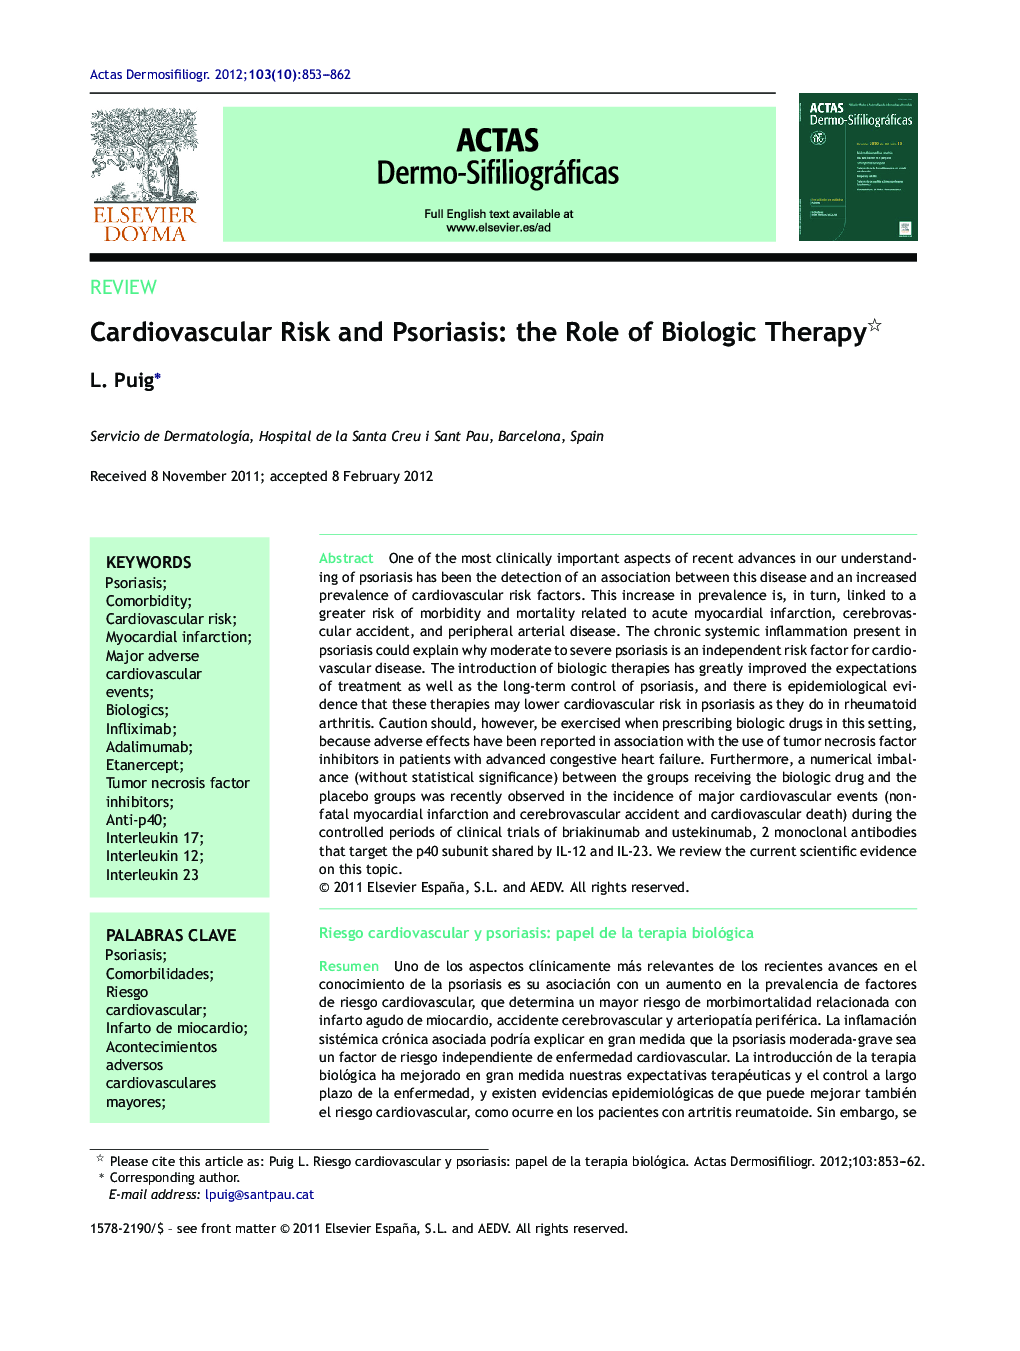 Cardiovascular Risk and Psoriasis: the Role of Biologic Therapy 